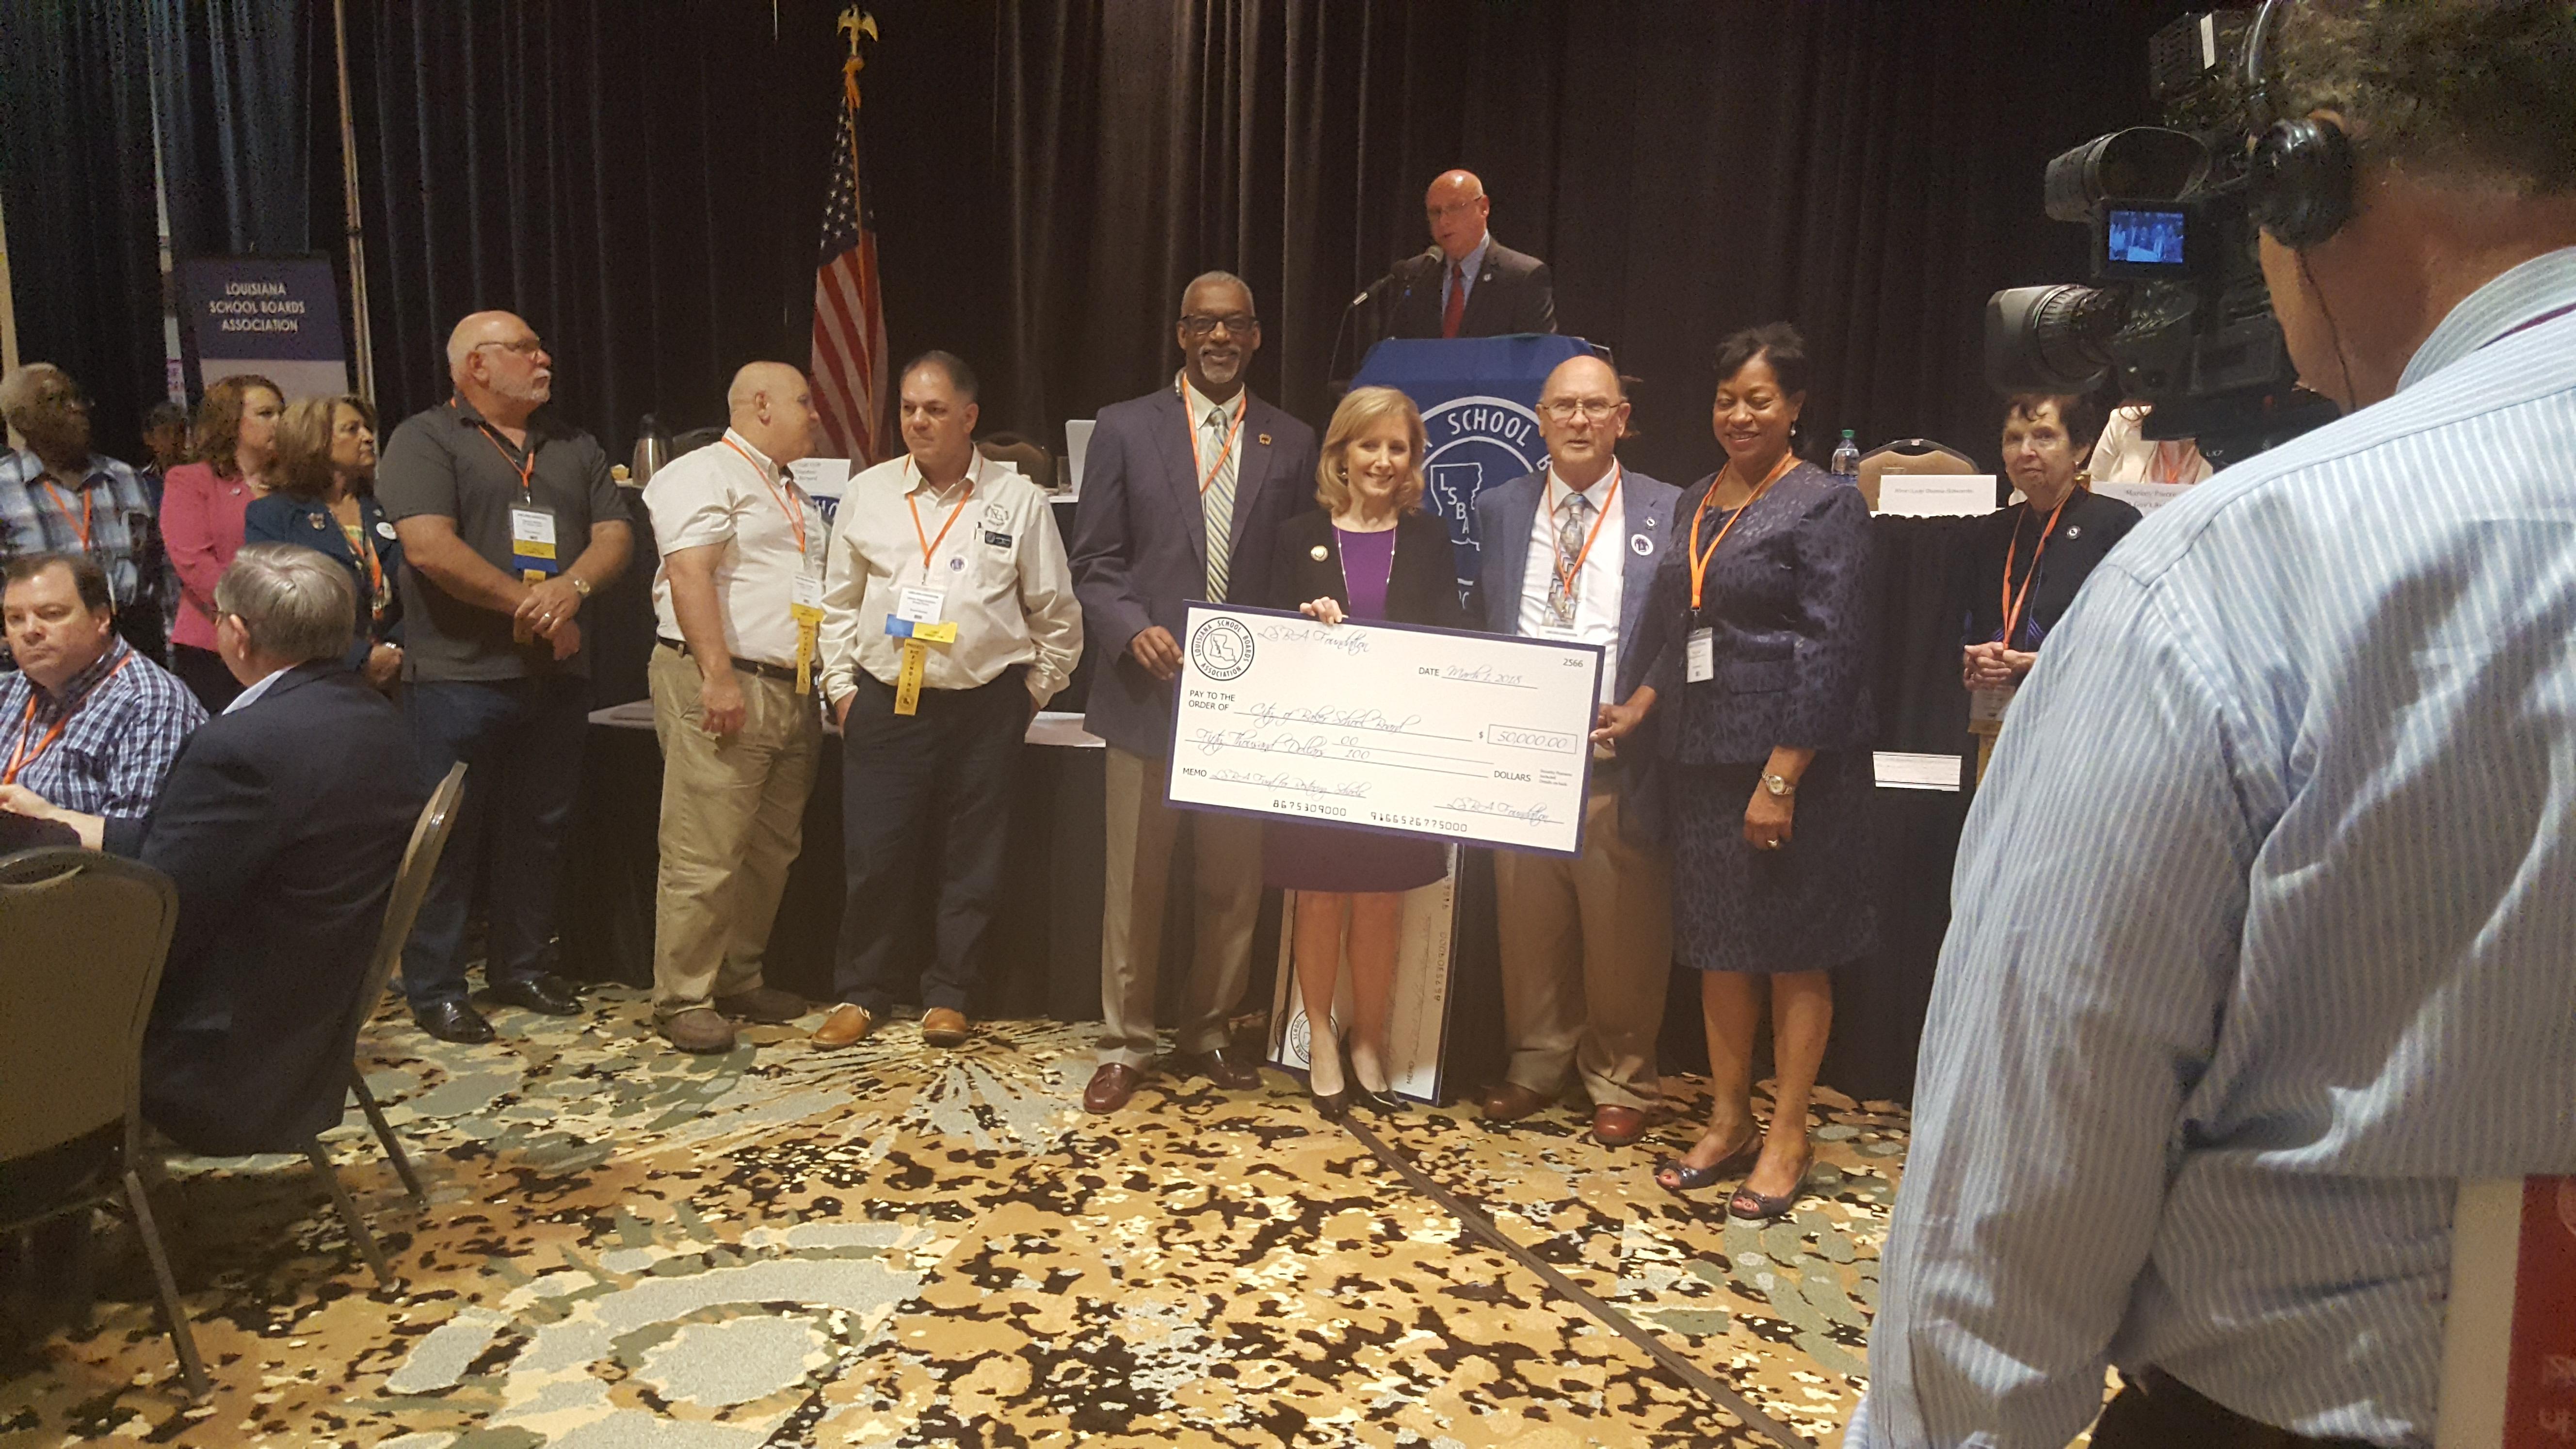 a photo of a officials with Dr. Brister at the LA School Board Association annual meeting. Dr. Brister is receiving a donation of $50,000 for the Baker District